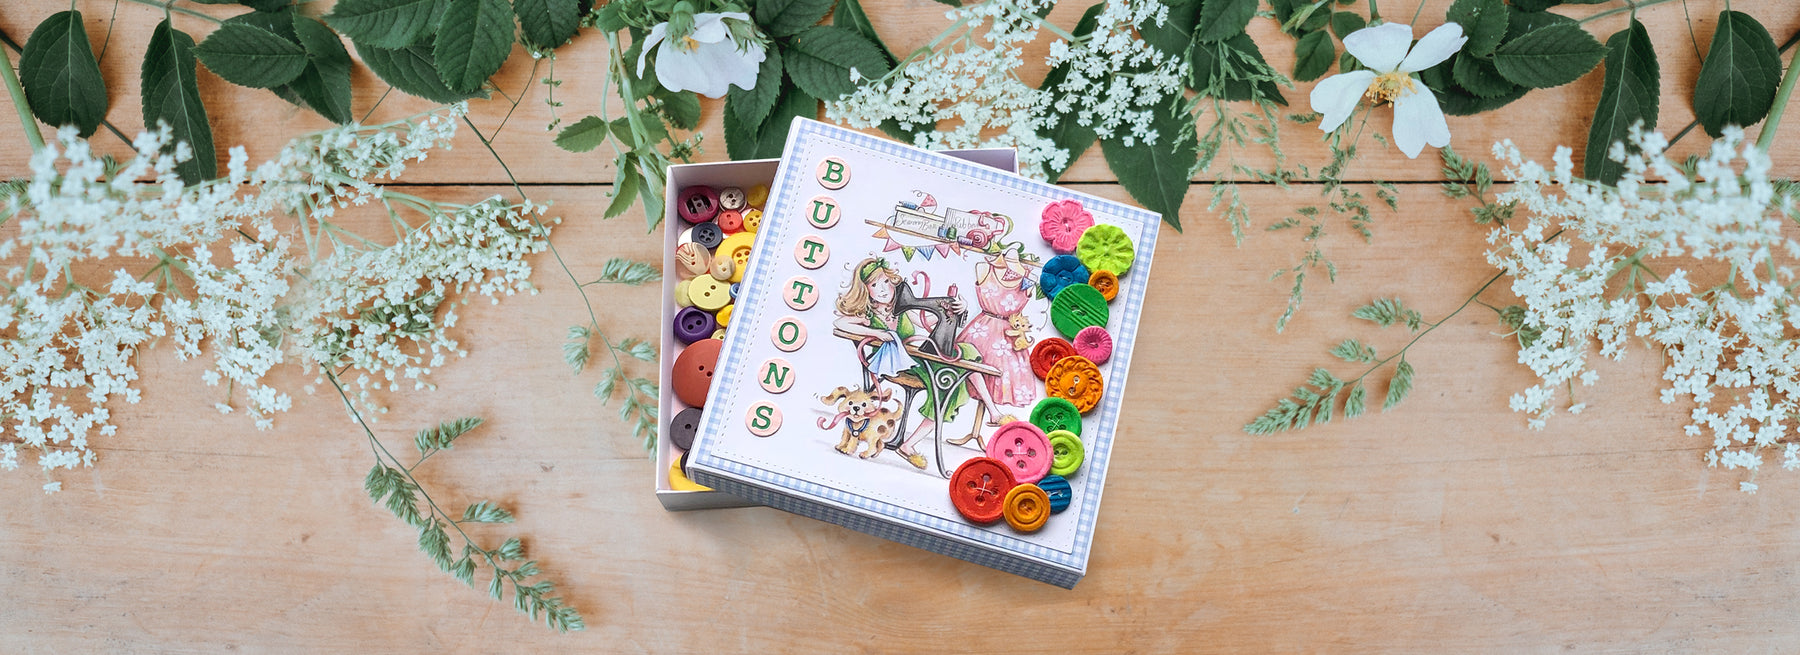 Make a Button Box with our Craftaholics Paper Craft Pad